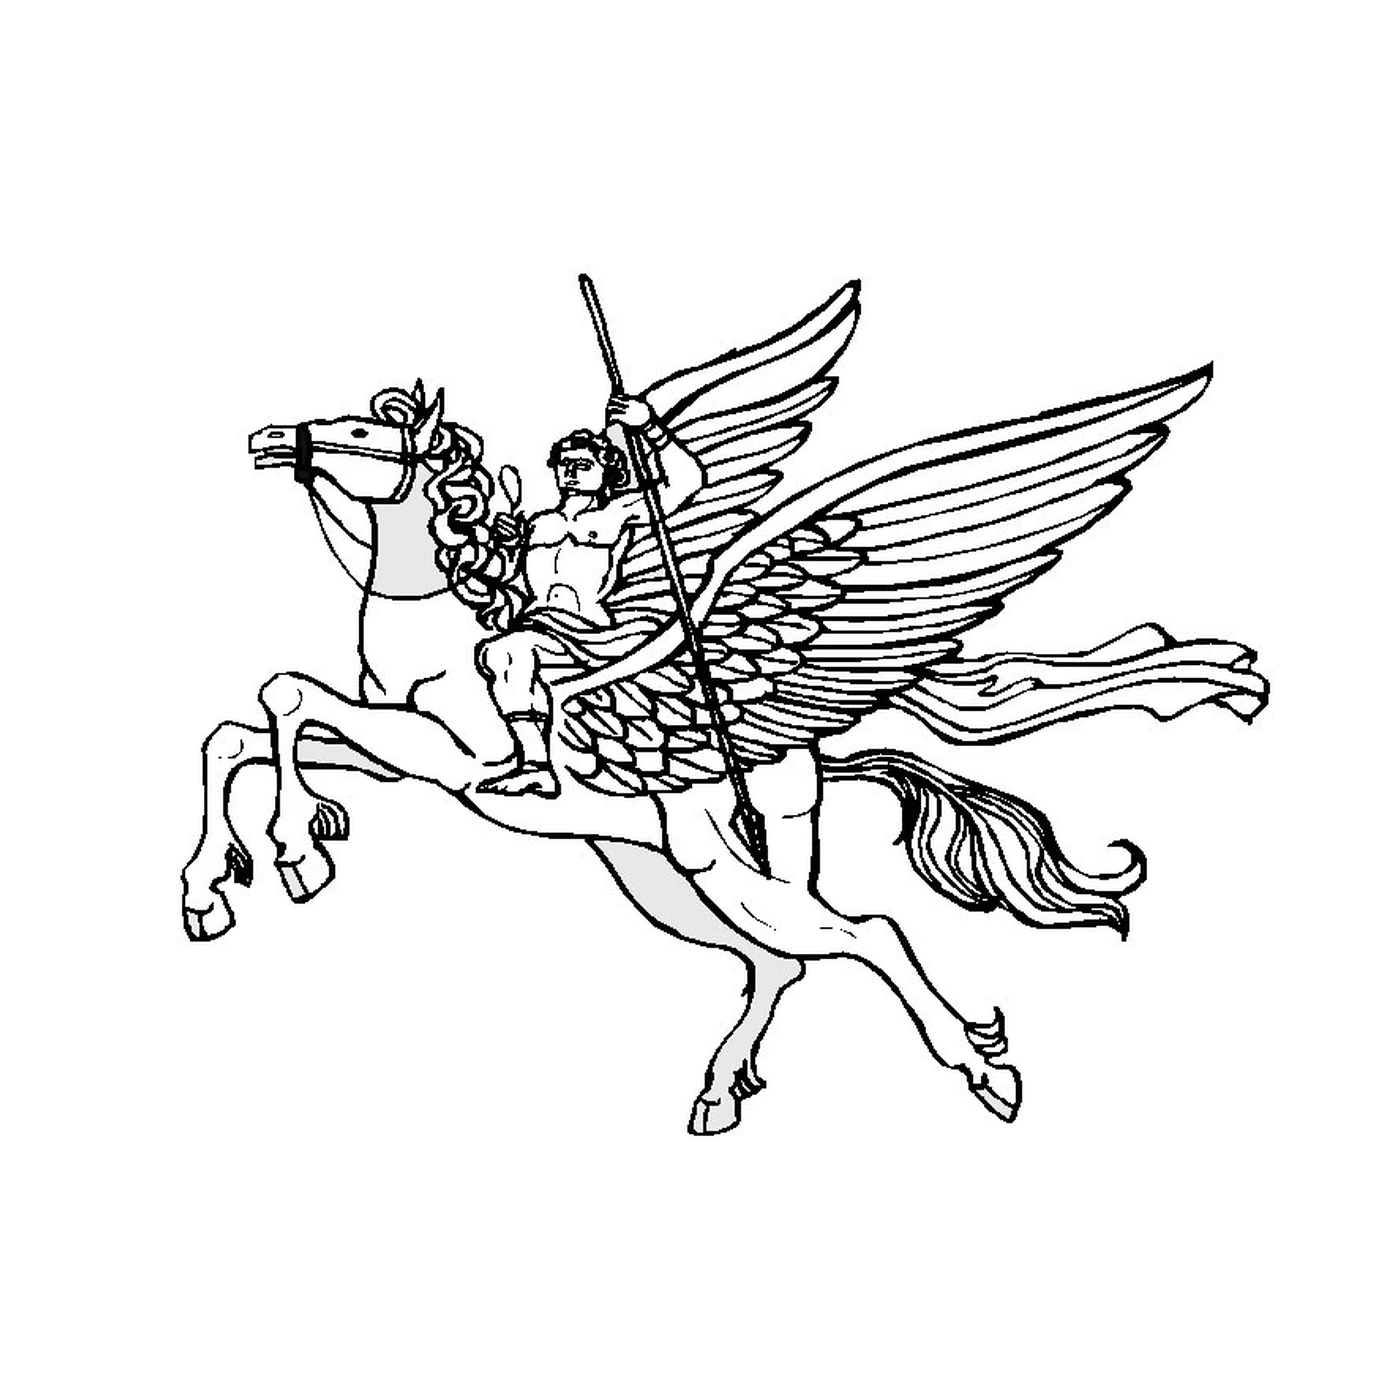  Man riding a winged horse 